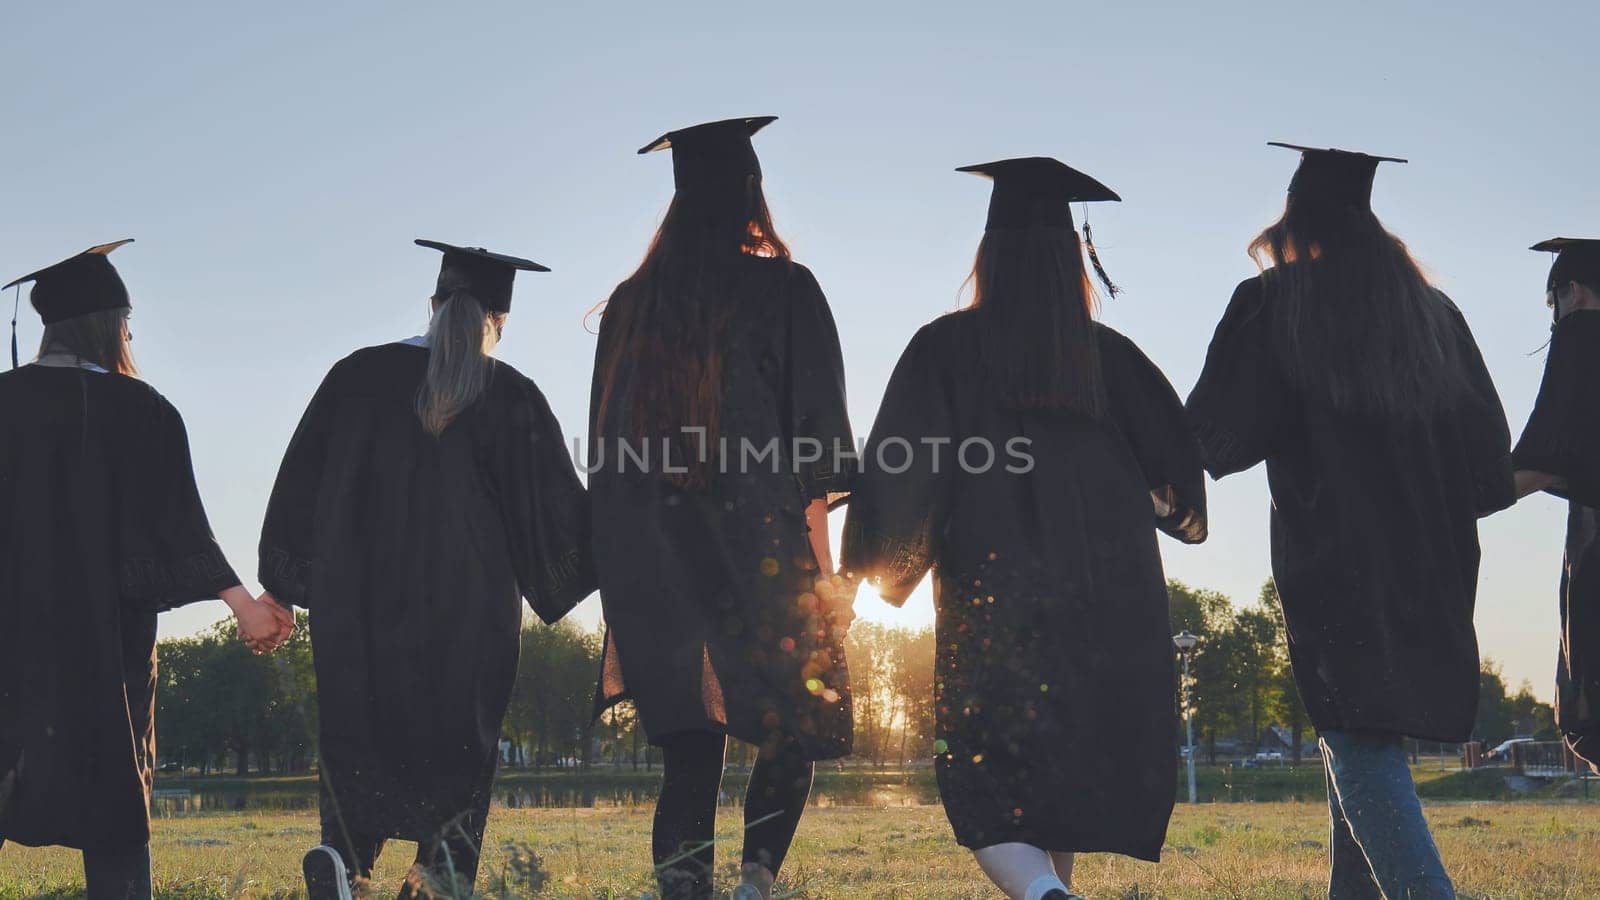 Graduate students walking through an evening meadow at sunset. by DovidPro